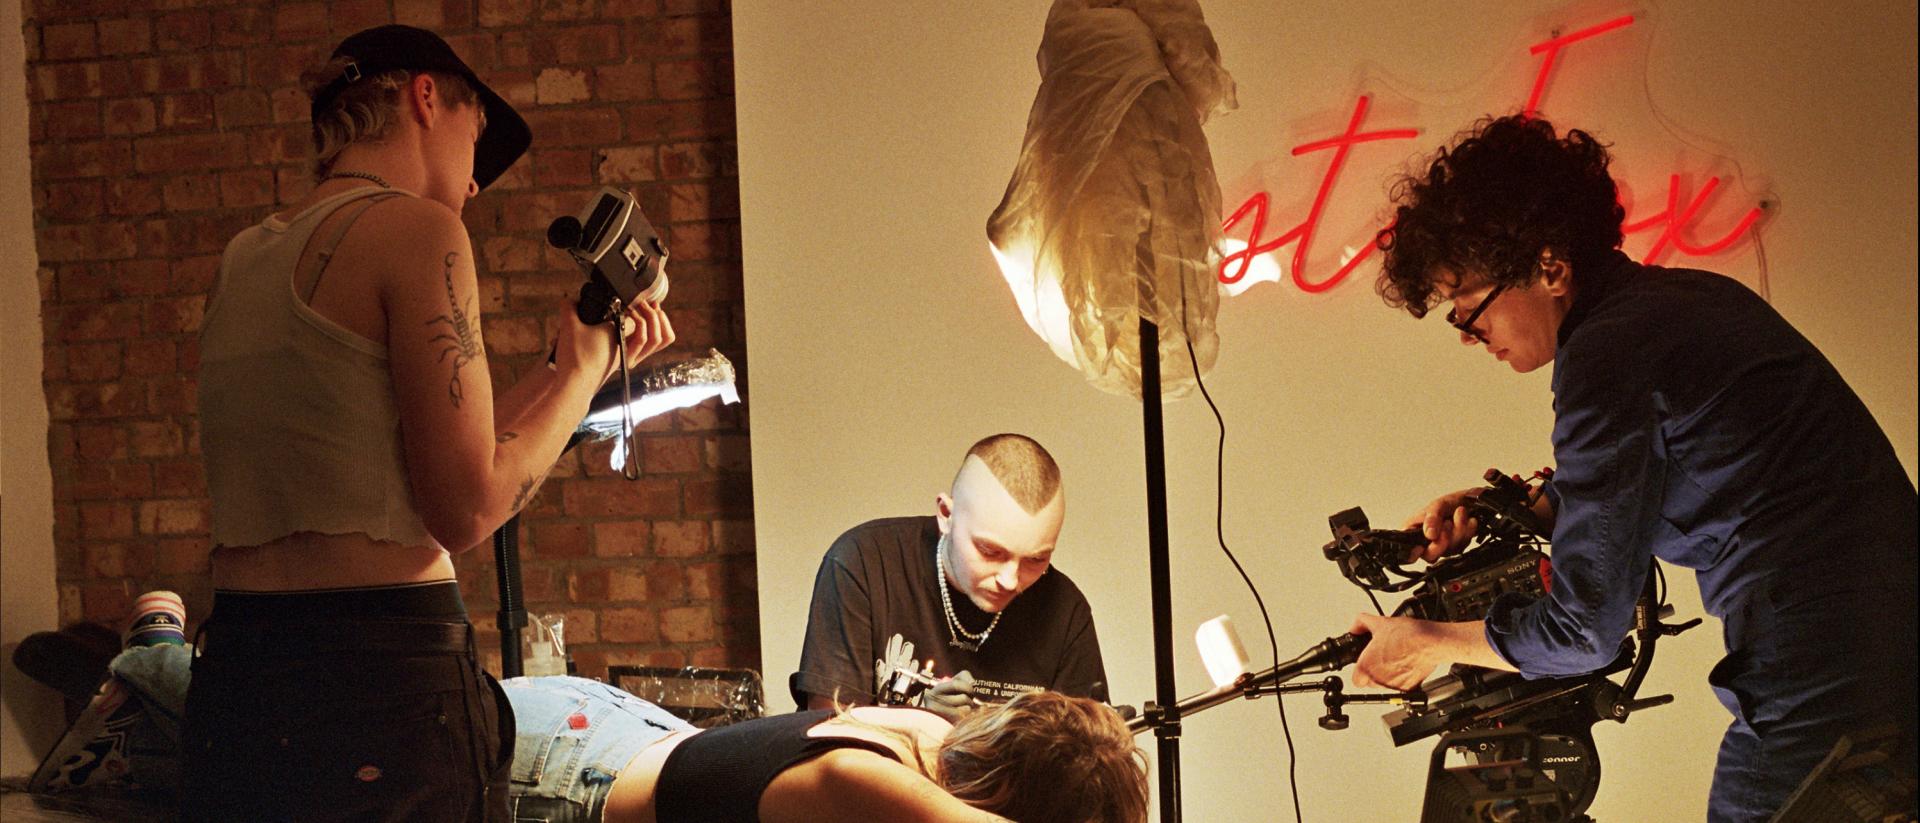 behind the scene photo of being seen, with a camera crew filming a person getting a tattoo